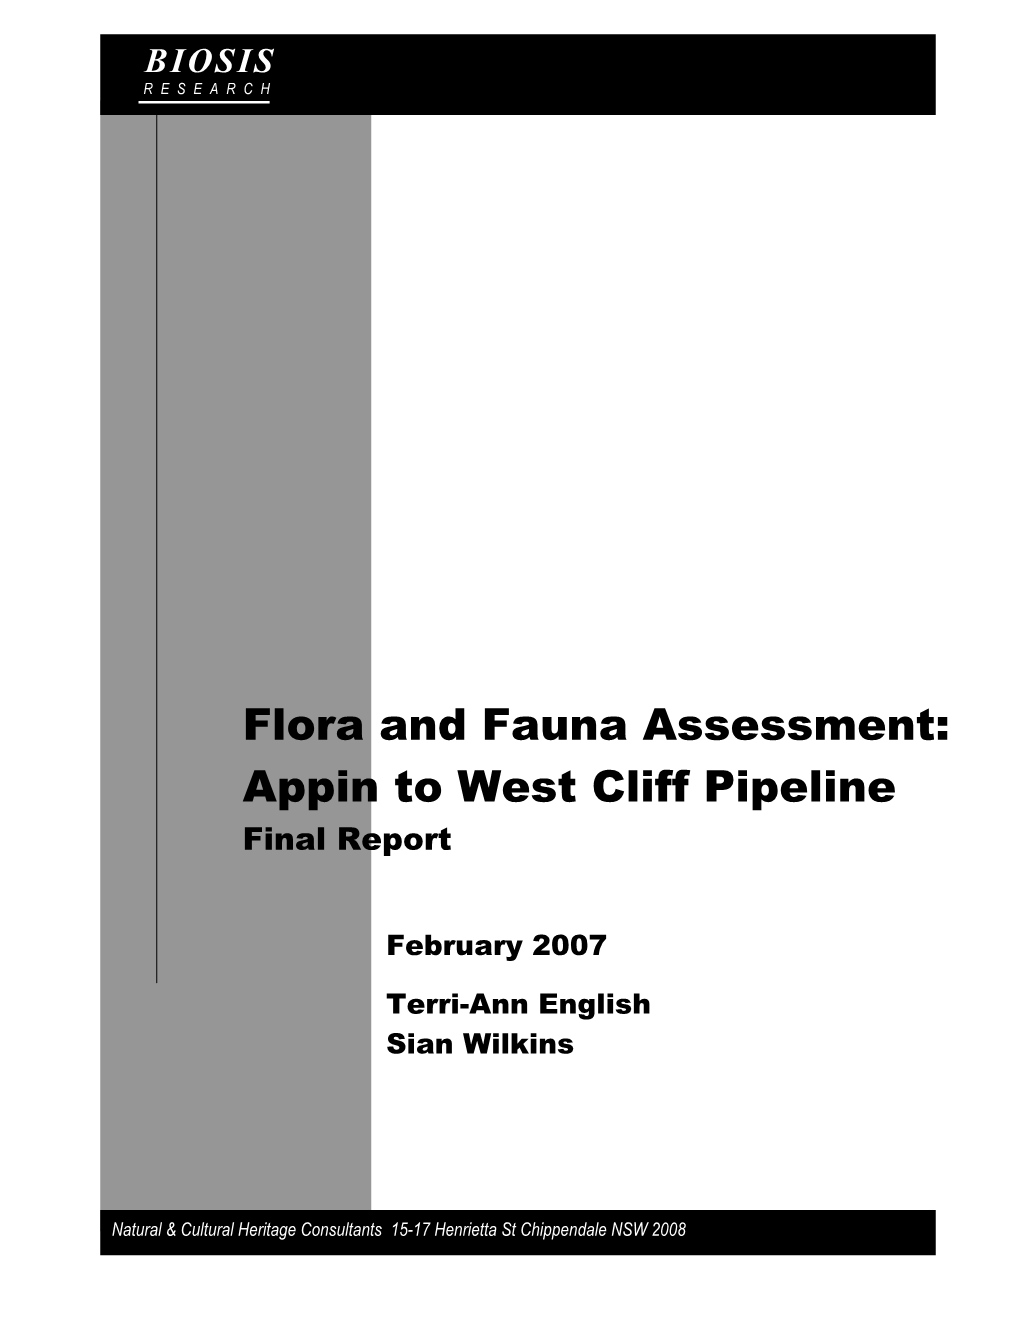 Flora and Fauna Assessment: Appin to West Cliff Pipeline 2007 RESEARCH